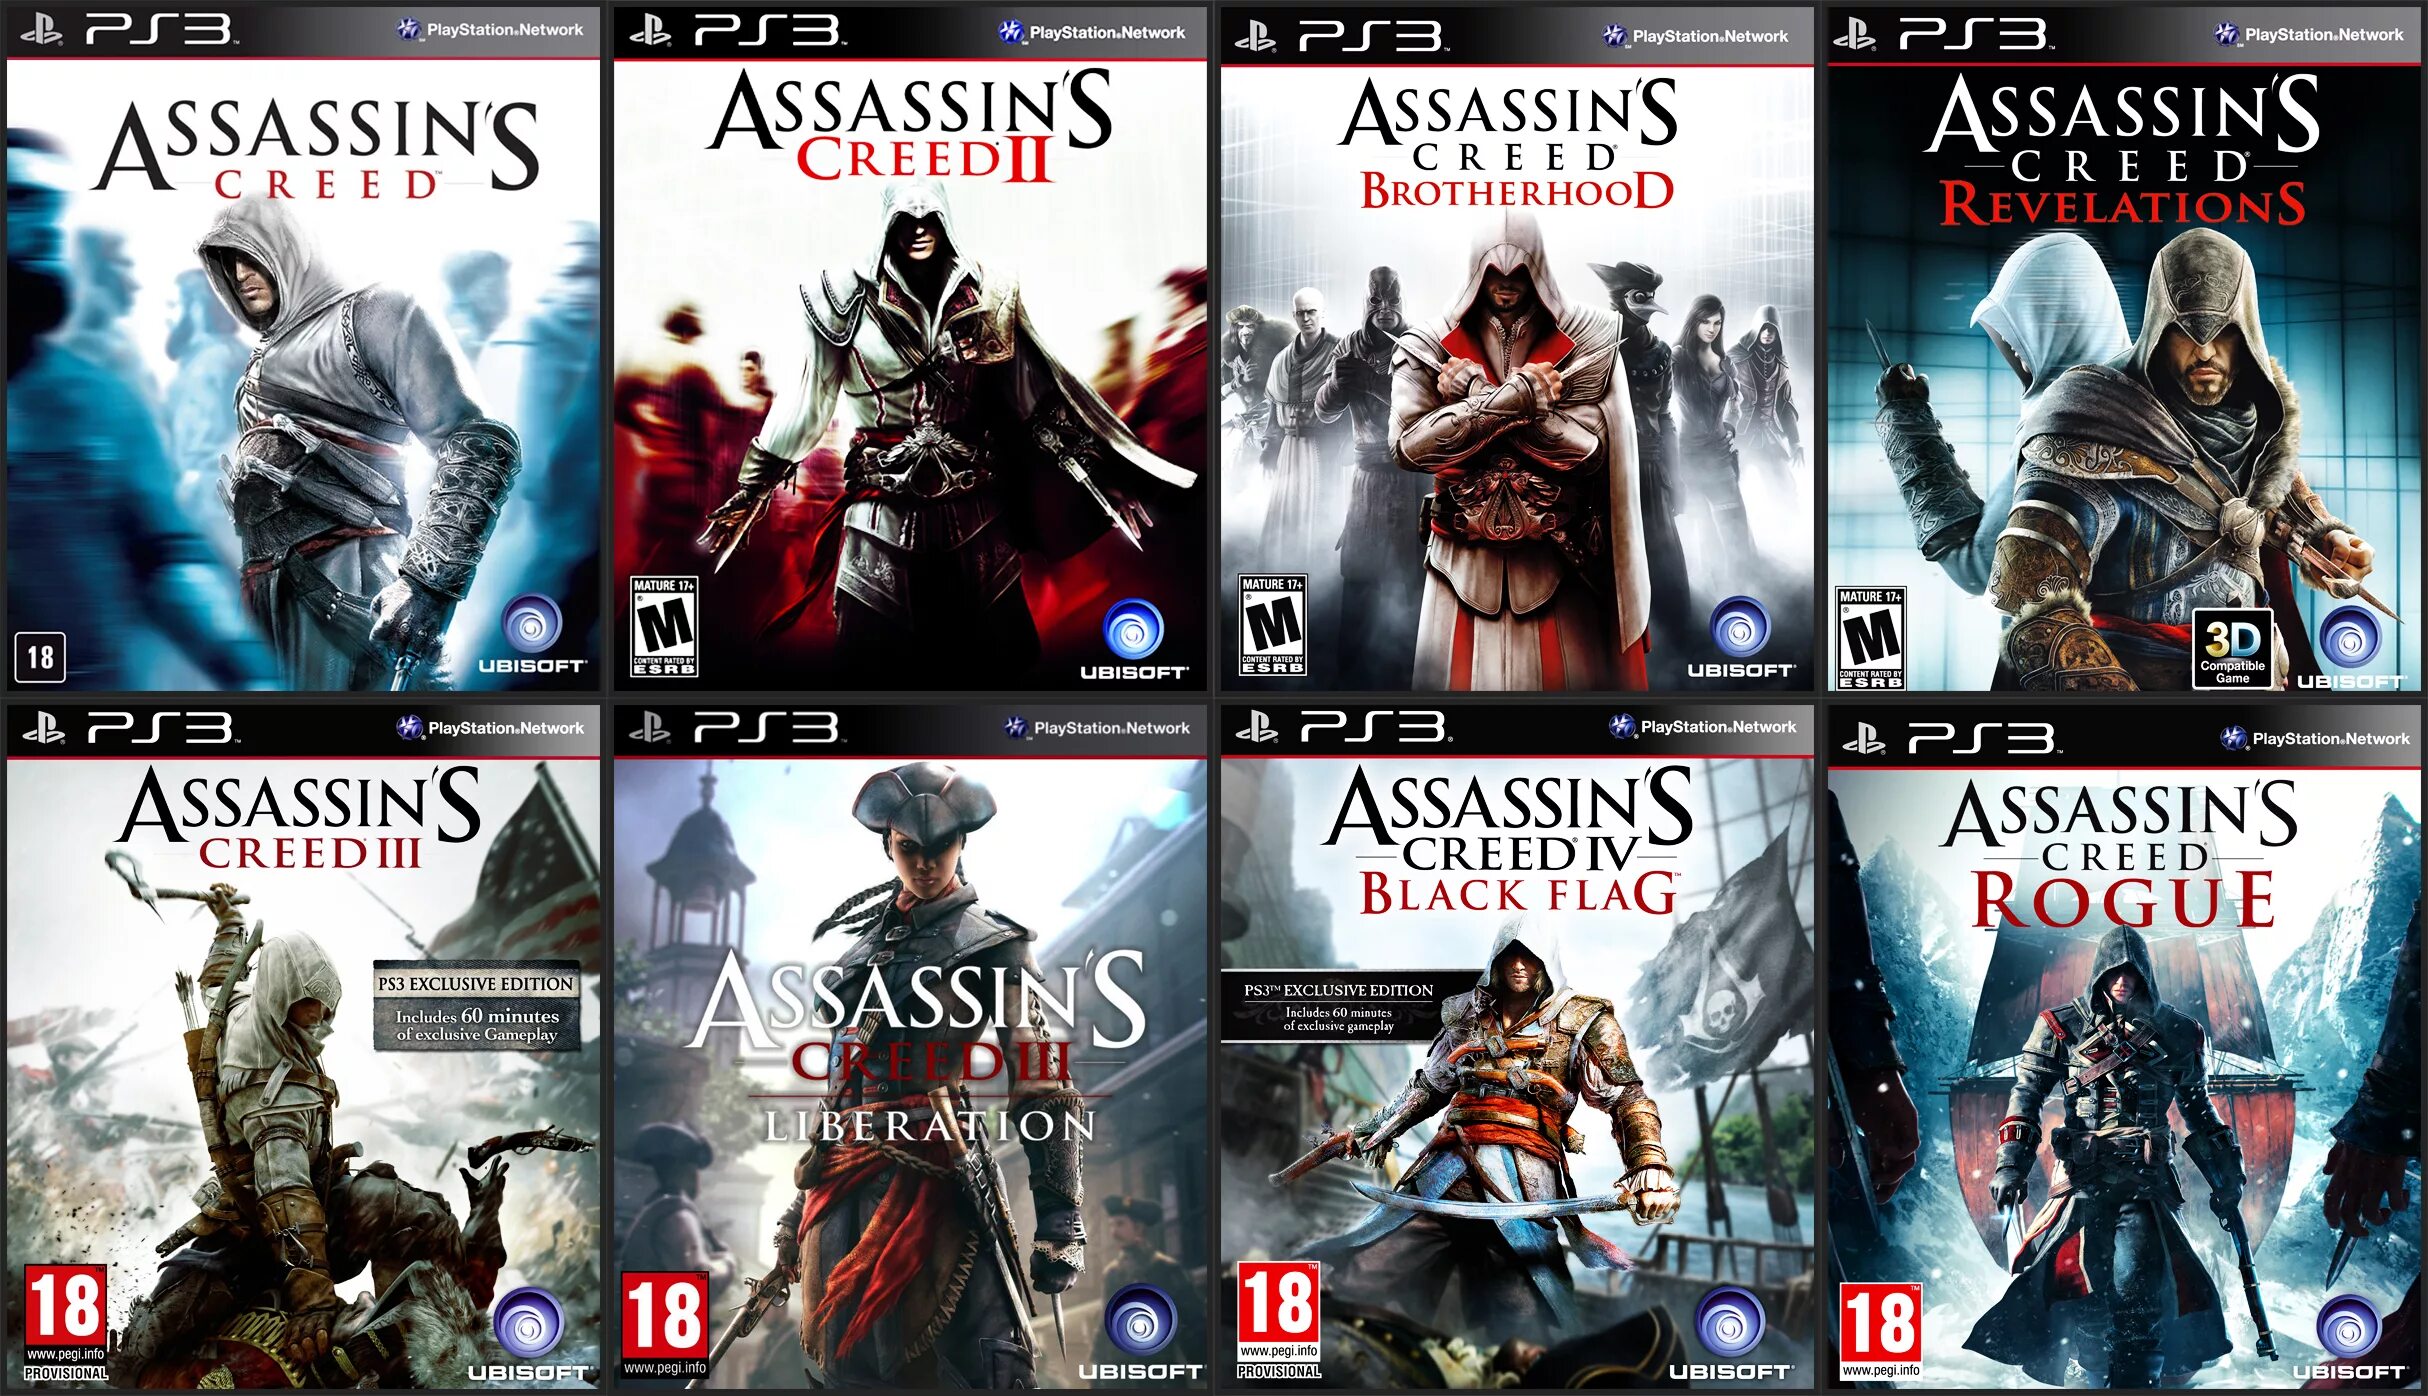 Assassin s ps3. Ассасин Крид 5 на ПС 3. Ассасин Крид 6 ПС 3. Assassins Creed 1 PLAYSTATION 4 PLAYSTATION 3. PLAYSTATION 4 диски ассасин 2.